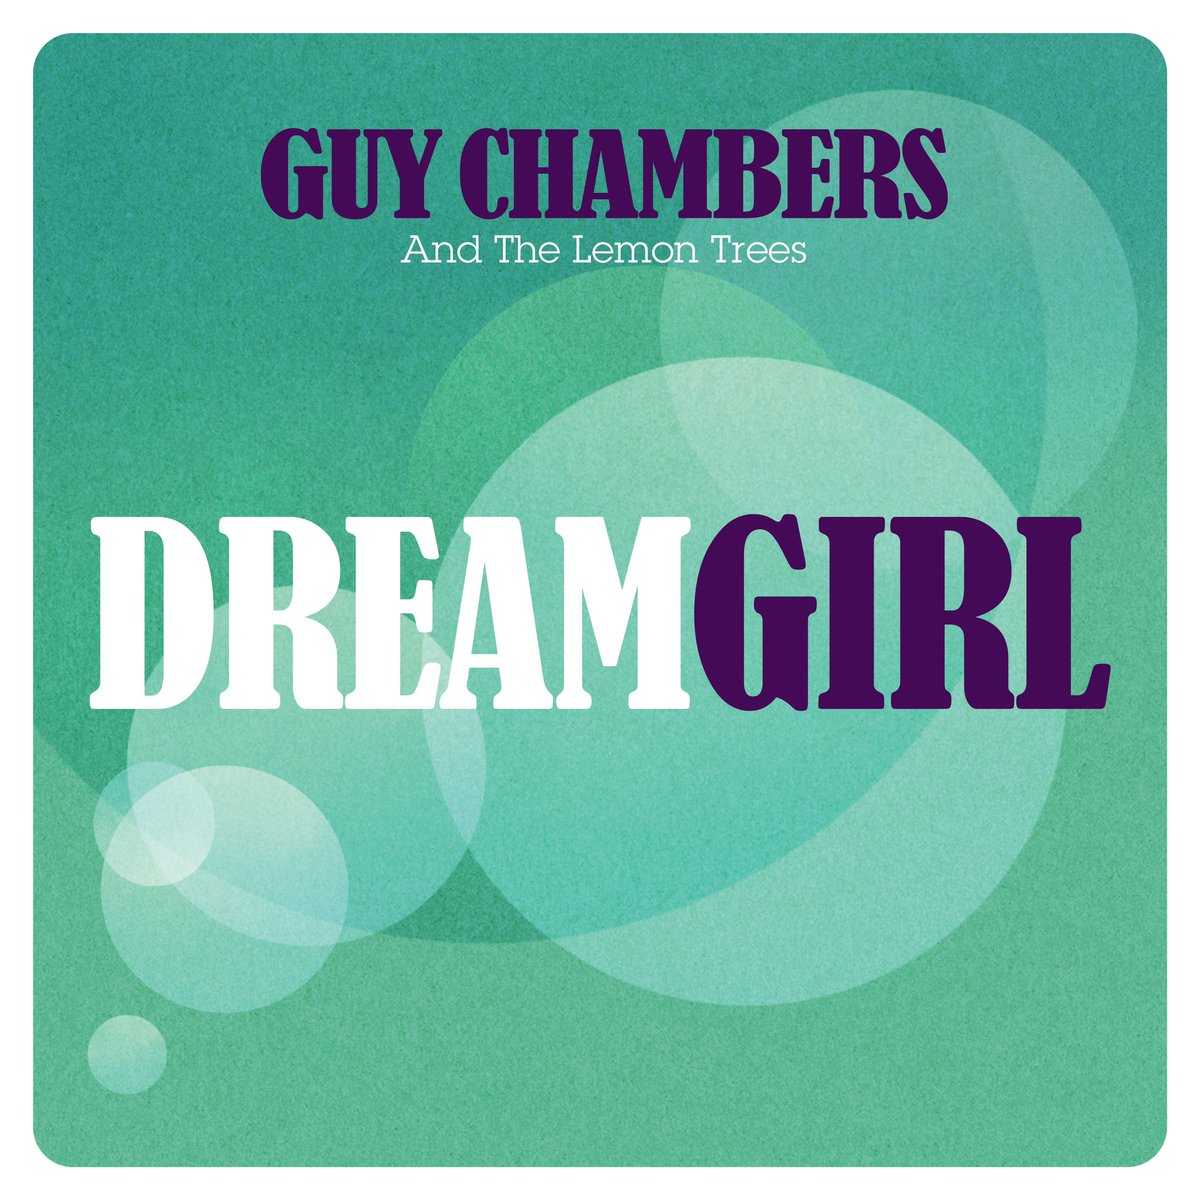 My new Guy Chambers & The Lemon Trees single ‘Dream Girl’ is out this Friday. Can’t wait for you all to hear it 🍋🌳